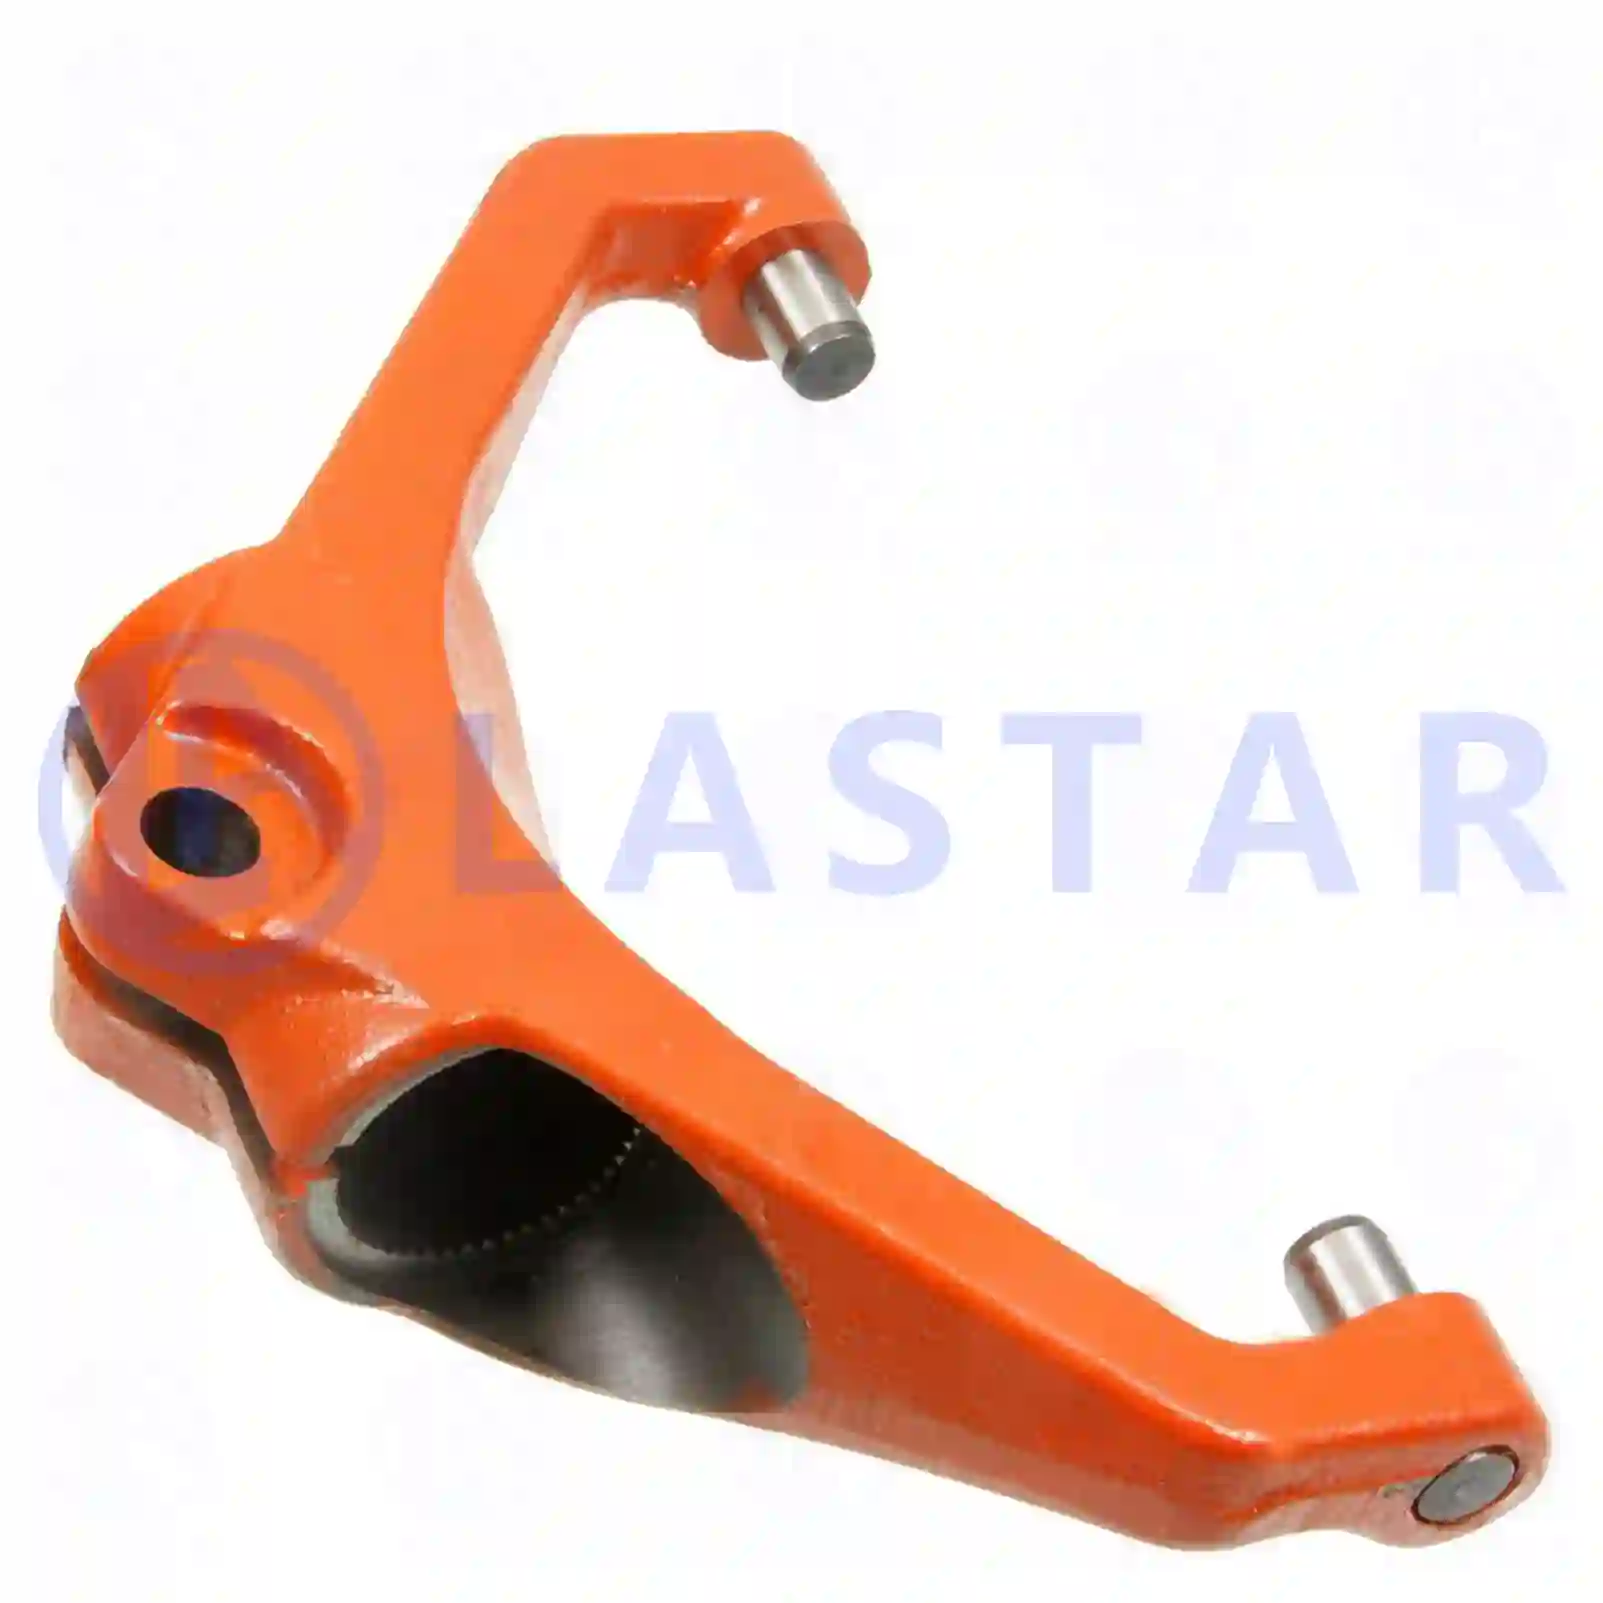 Release Lever Release fork, with rolls, la no: 77722295 ,  oem no:1667058S, ZG30364-0008 Lastar Spare Part | Truck Spare Parts, Auotomotive Spare Parts